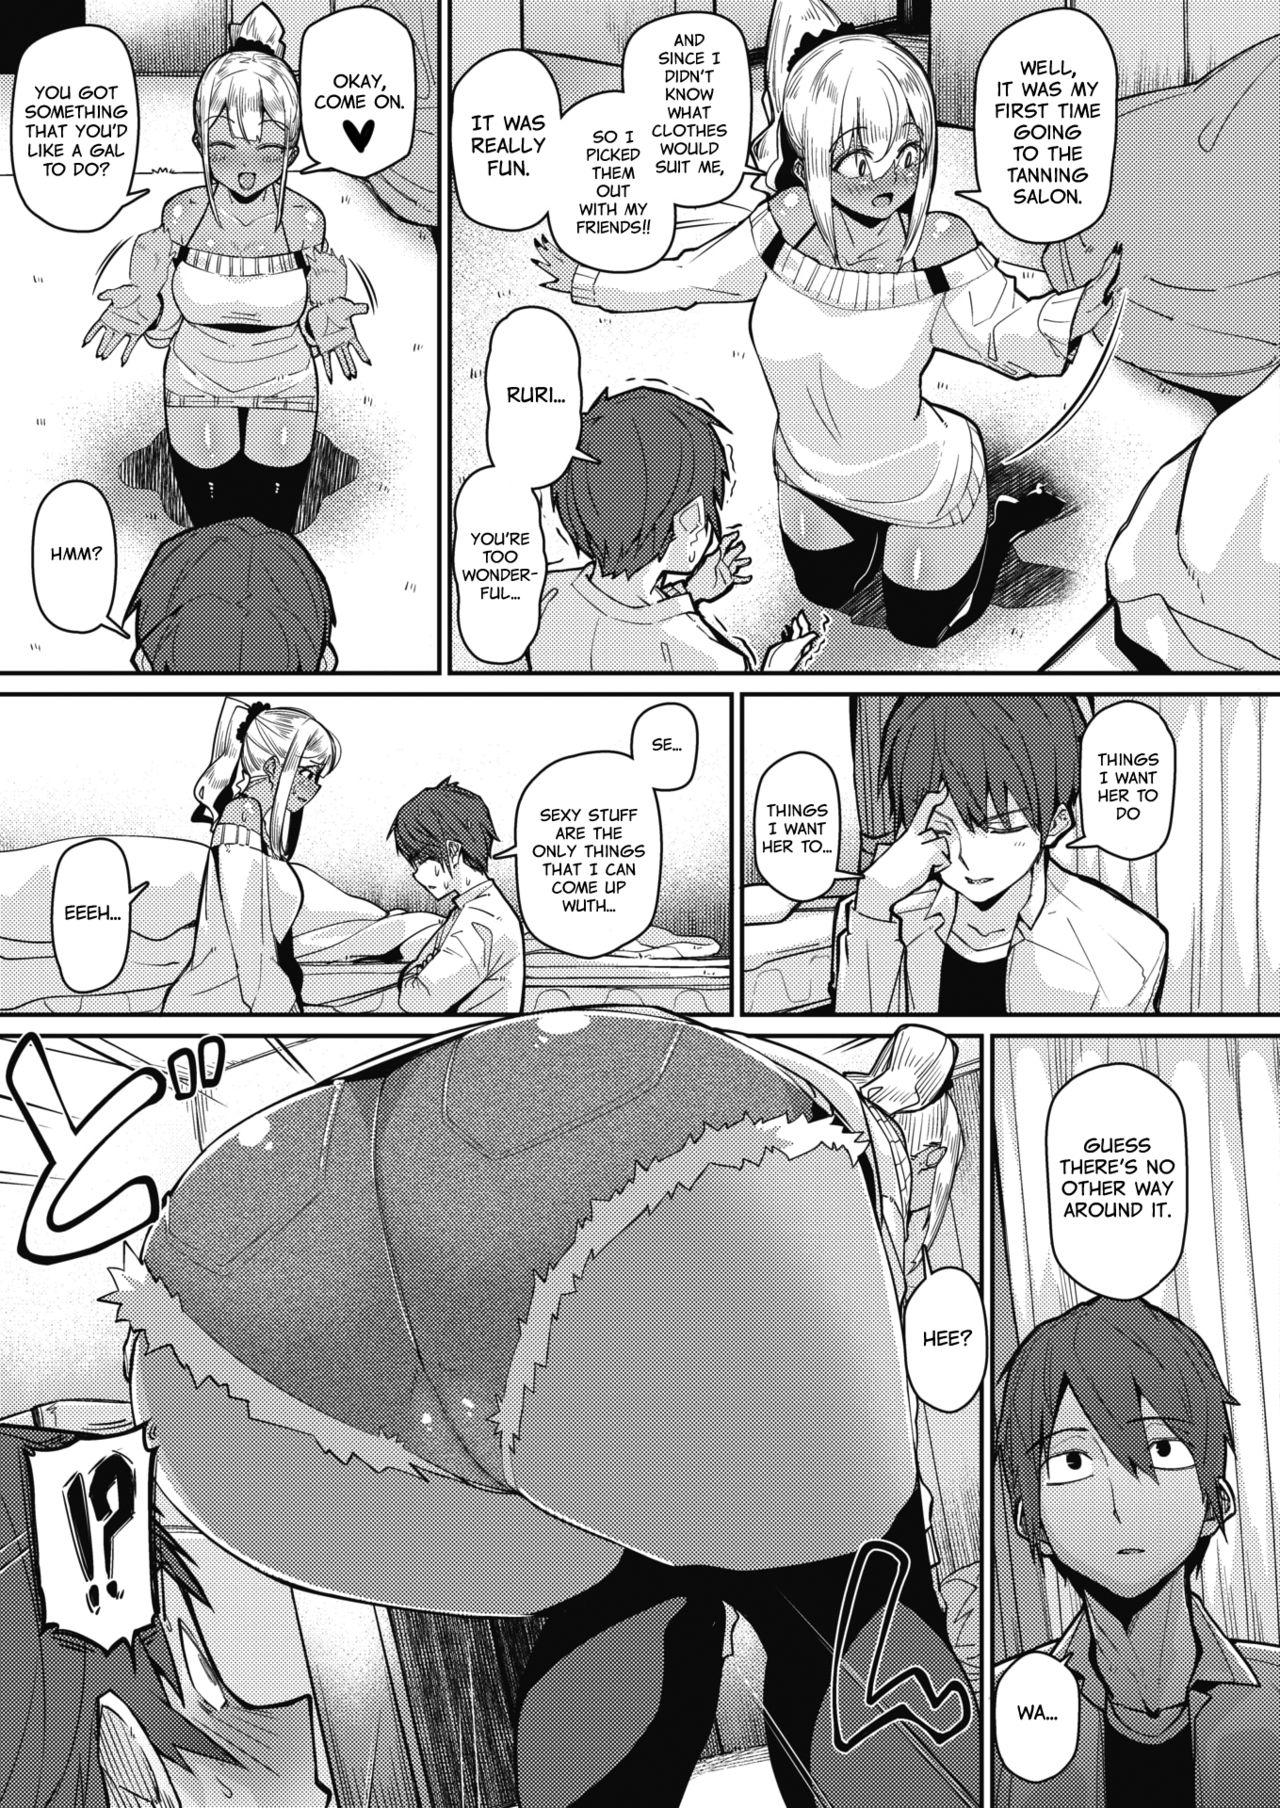 Sapphicerotica Gekkan "Za Bicchi" wo Mita Onna no Hannou ni Tsuite | About the Reaction of the Girl Who Saw "The Bitch Monthly" Passivo - Page 5